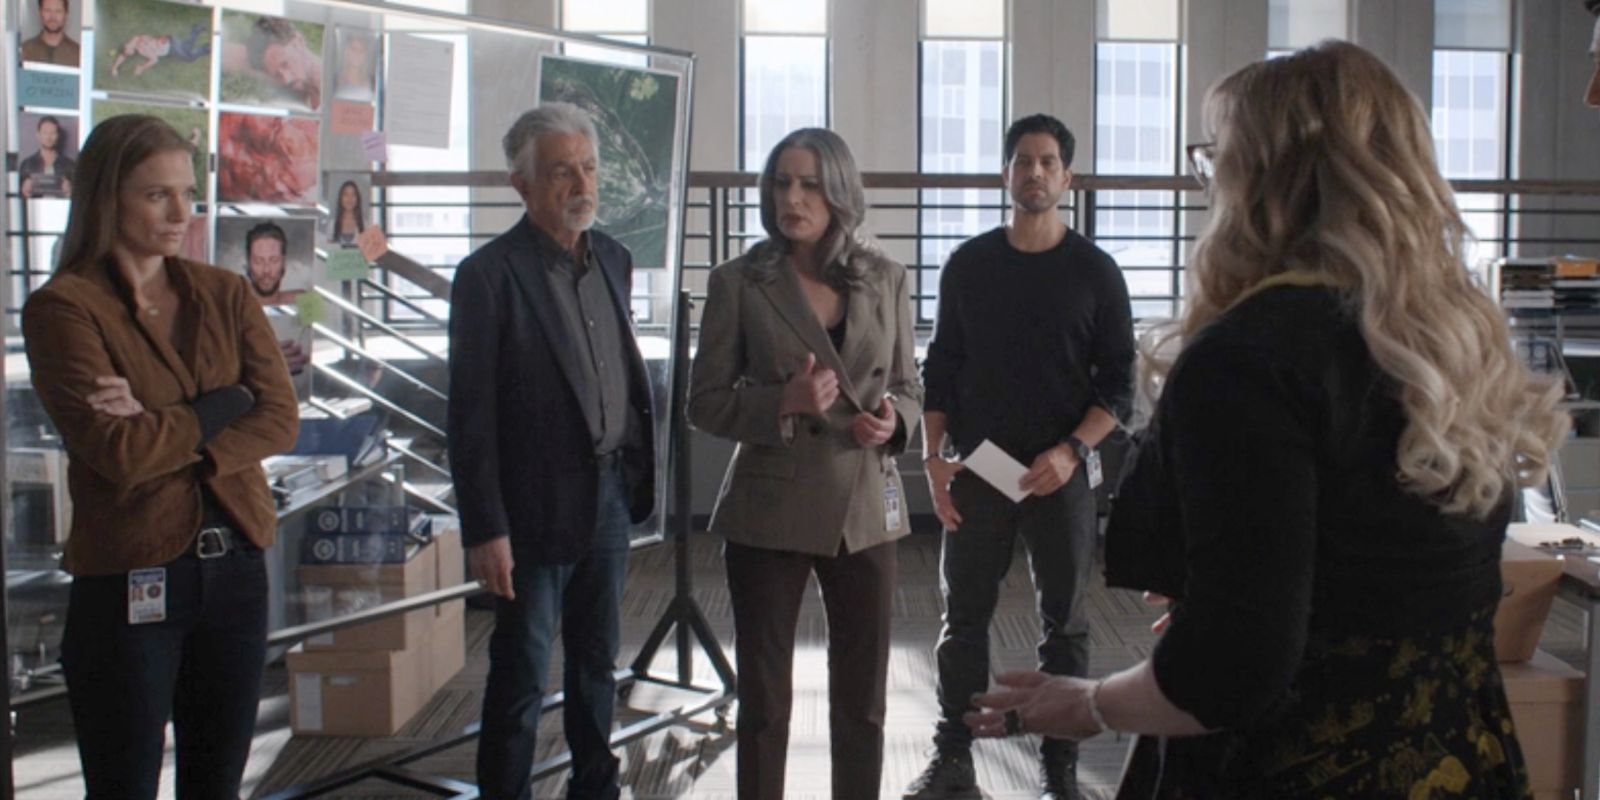 The BAU talking together as a group in their office in Criminal Minds: Evolution